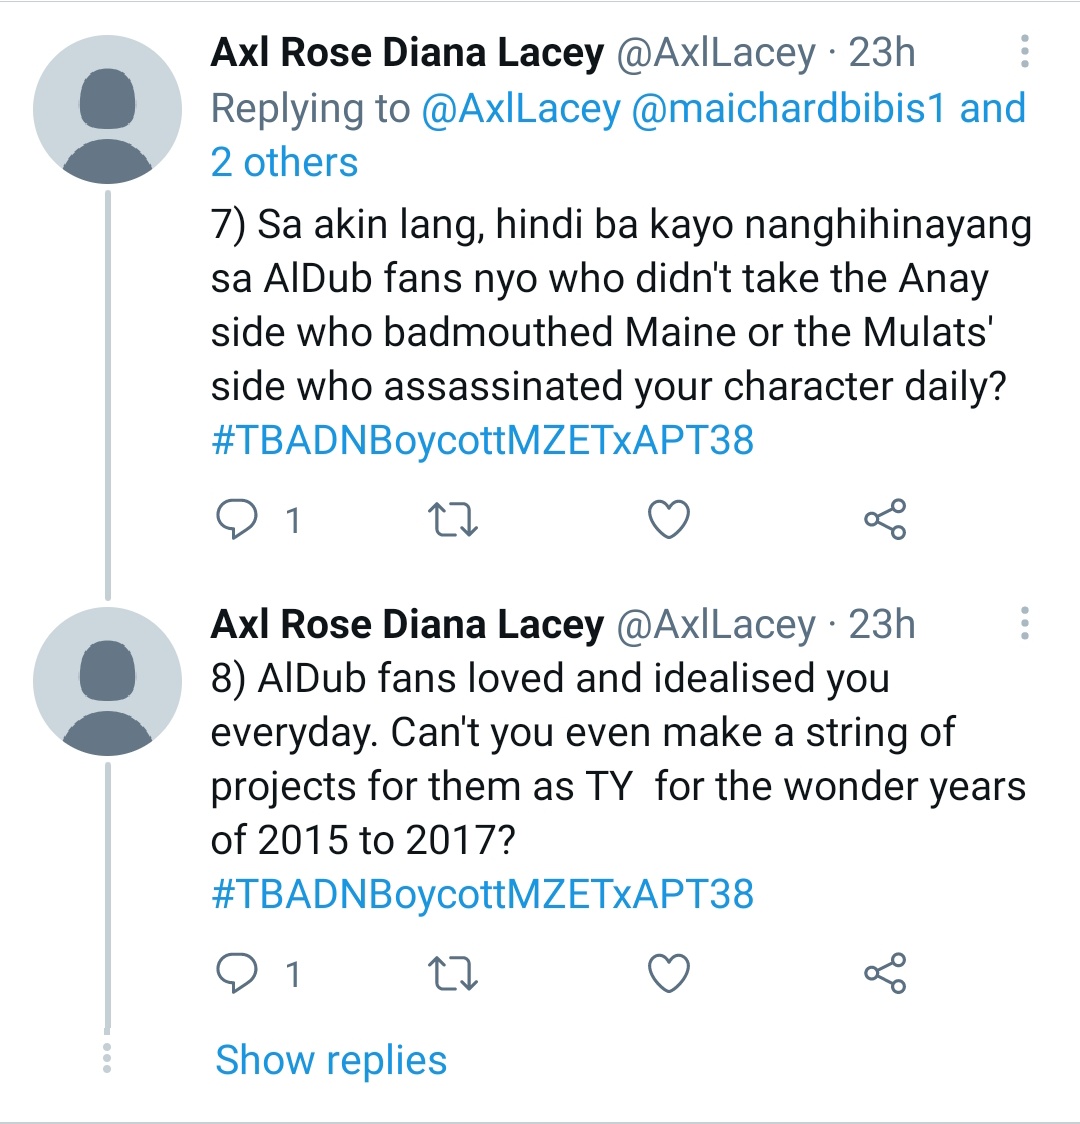  https://twitter.com/maichardbibis1/status/1382154914579705856?s=19 Last night, I chanced upon this thread, prompting me to check out IG, and there I learned that Alden's new TS is happening sooner rather than later. So, I wrote these posts. I don't think Maine & Alden are totally helpless.  #TBADNBoycottMZETxAPT39